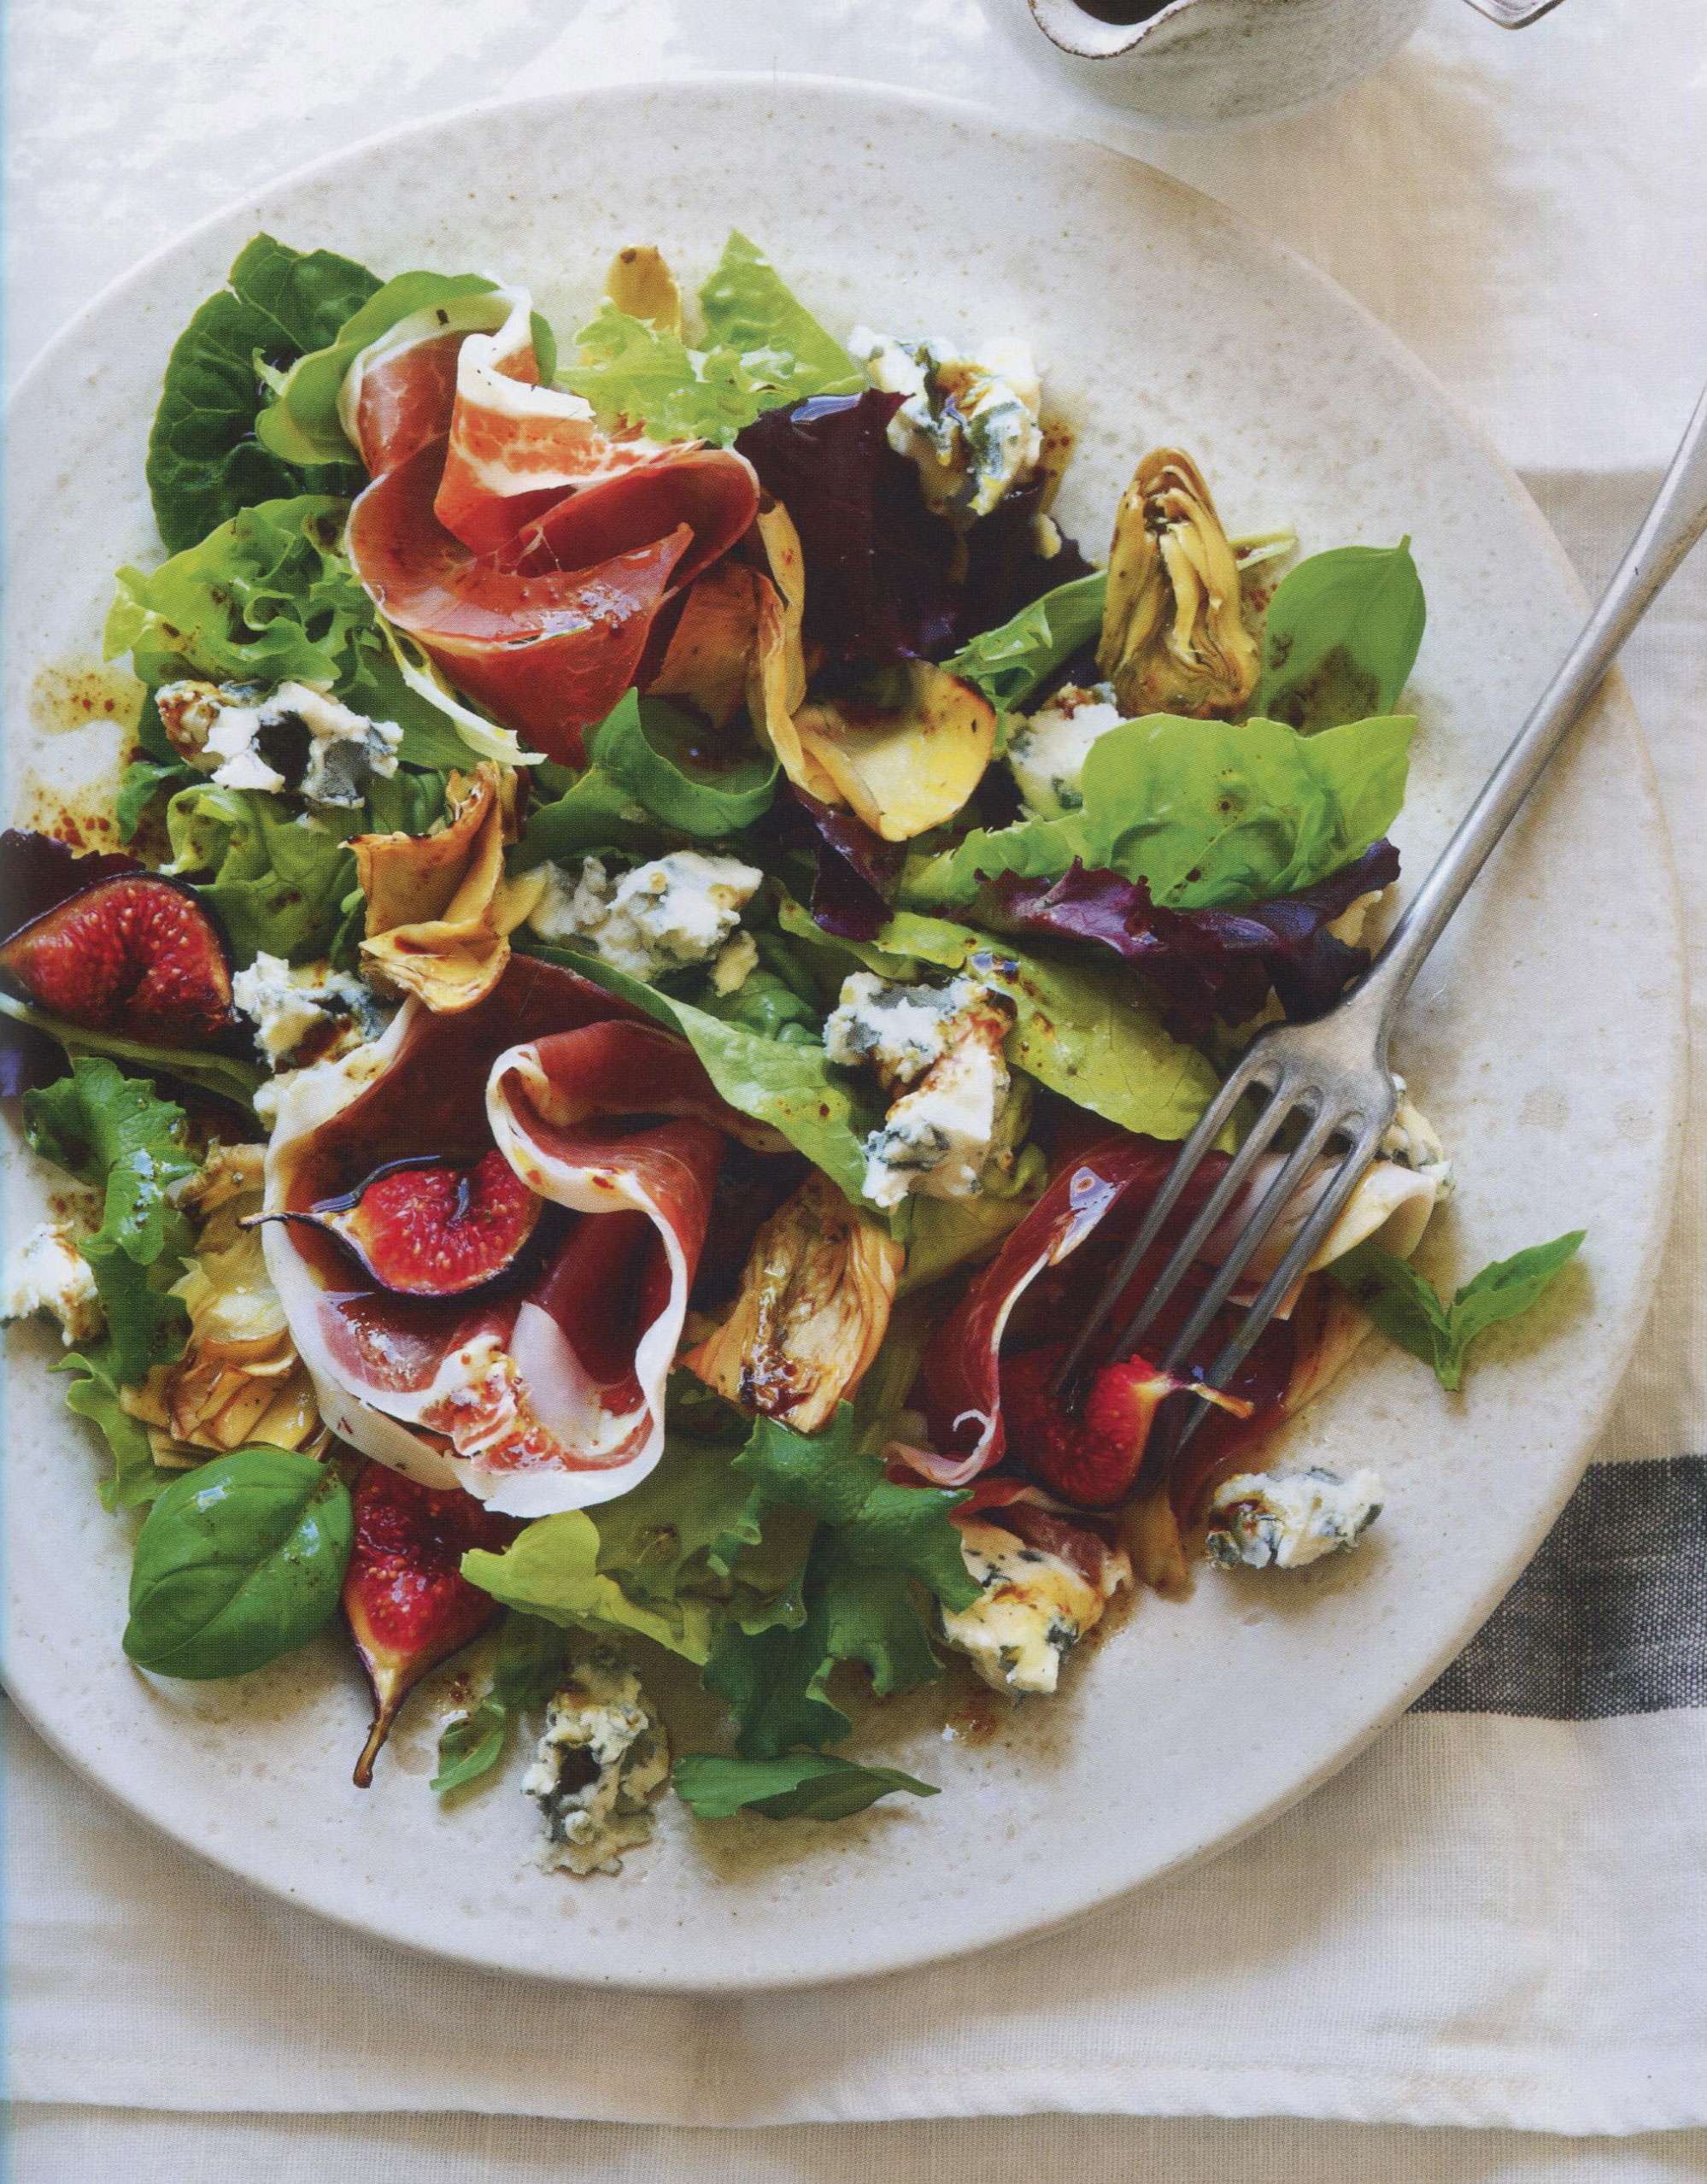 Prosciutto, Artichoke, Fig and Roquefort Salad with Balsamic Dressing